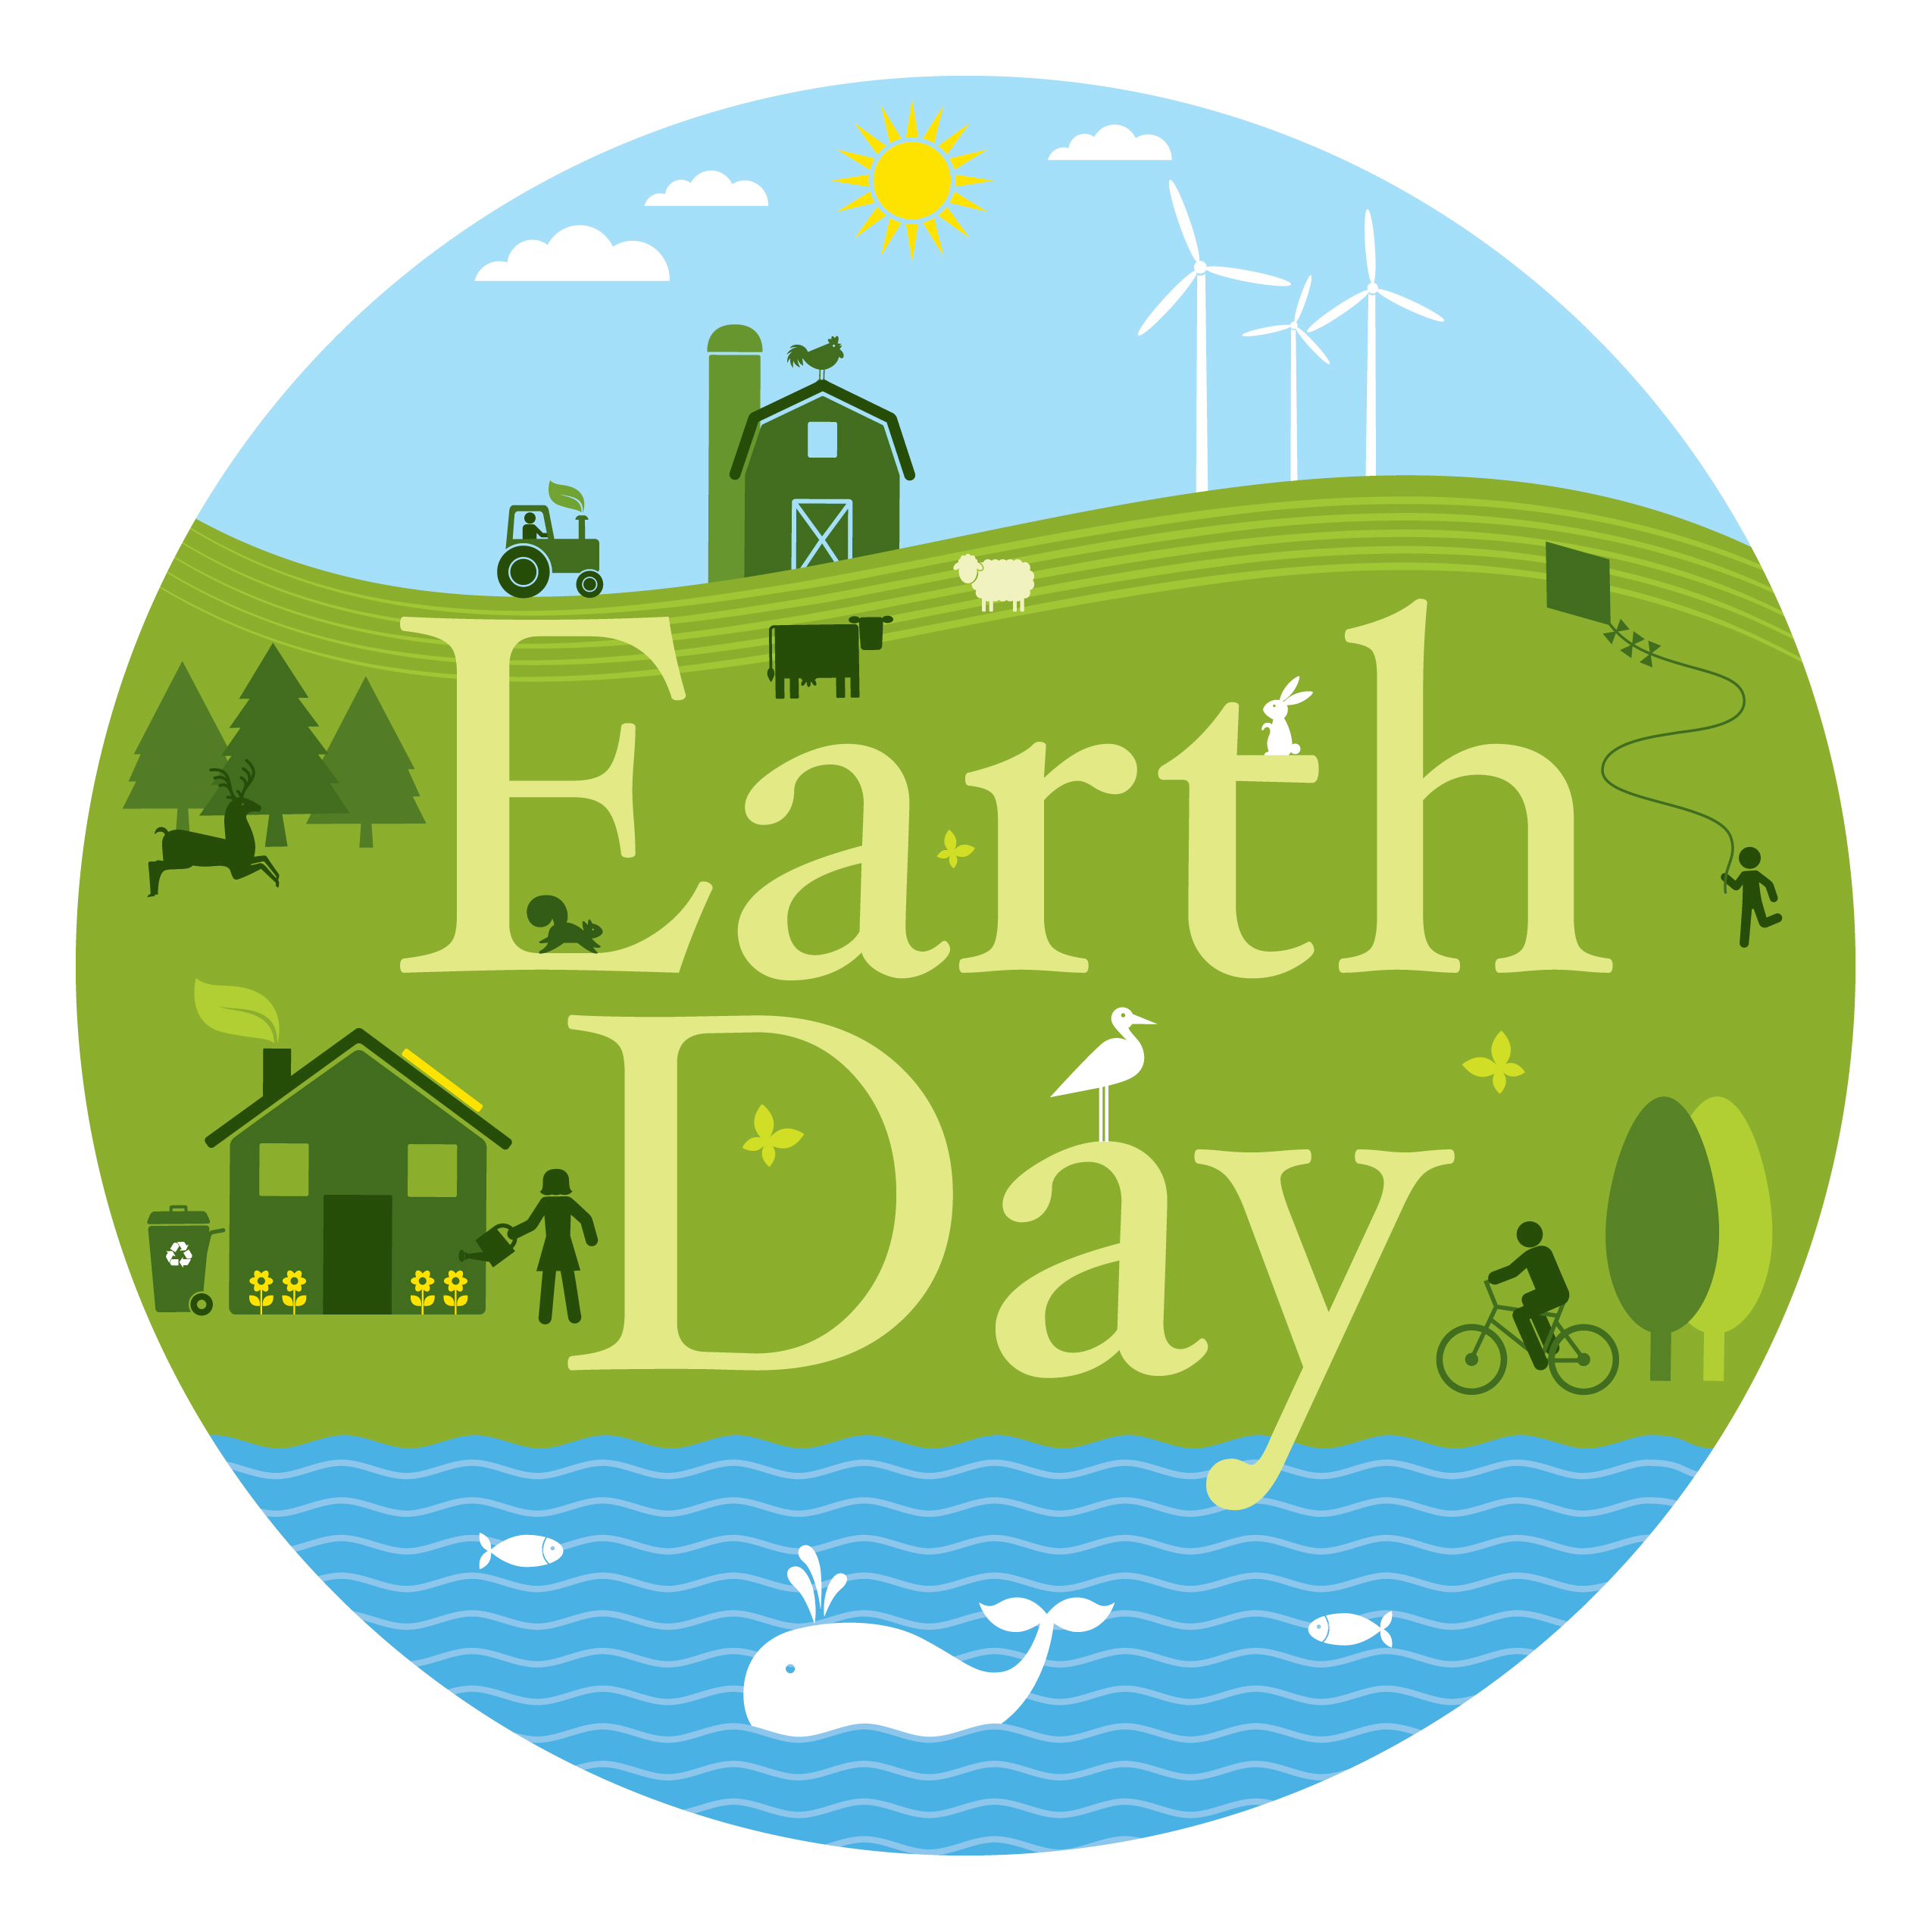 How Will You Celebrate Earth Day This Weekend?!?